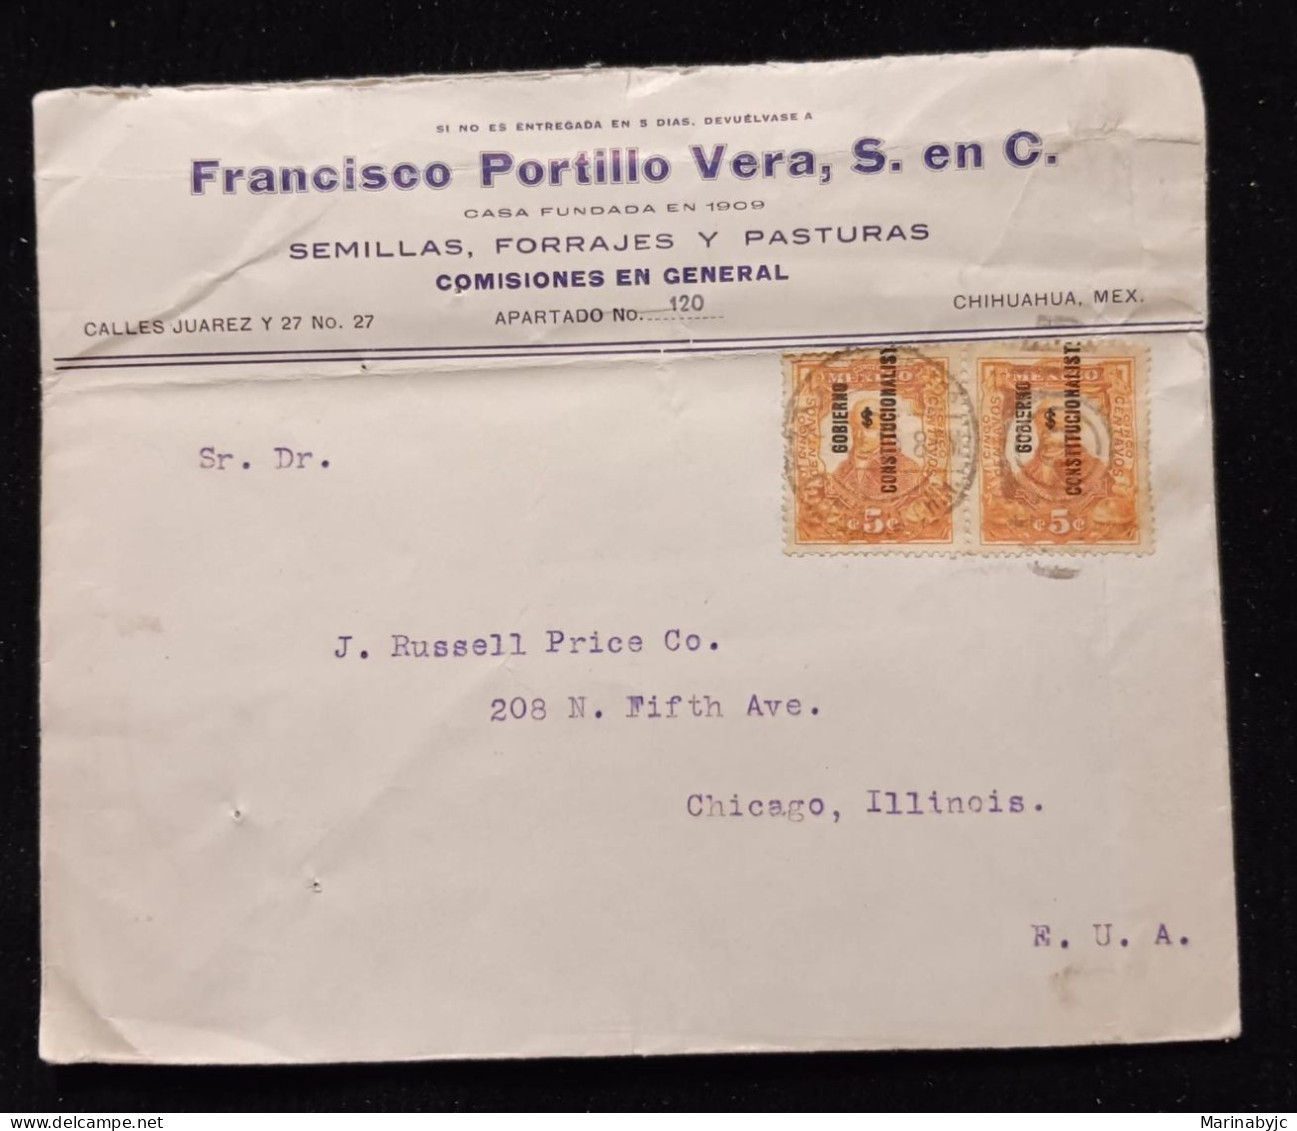 C) 1915. MEXICO. AIRMAIL ENVELOPE SENT TO USA. DOUBLE STAMP. 2ND CHOICE - Mexiko